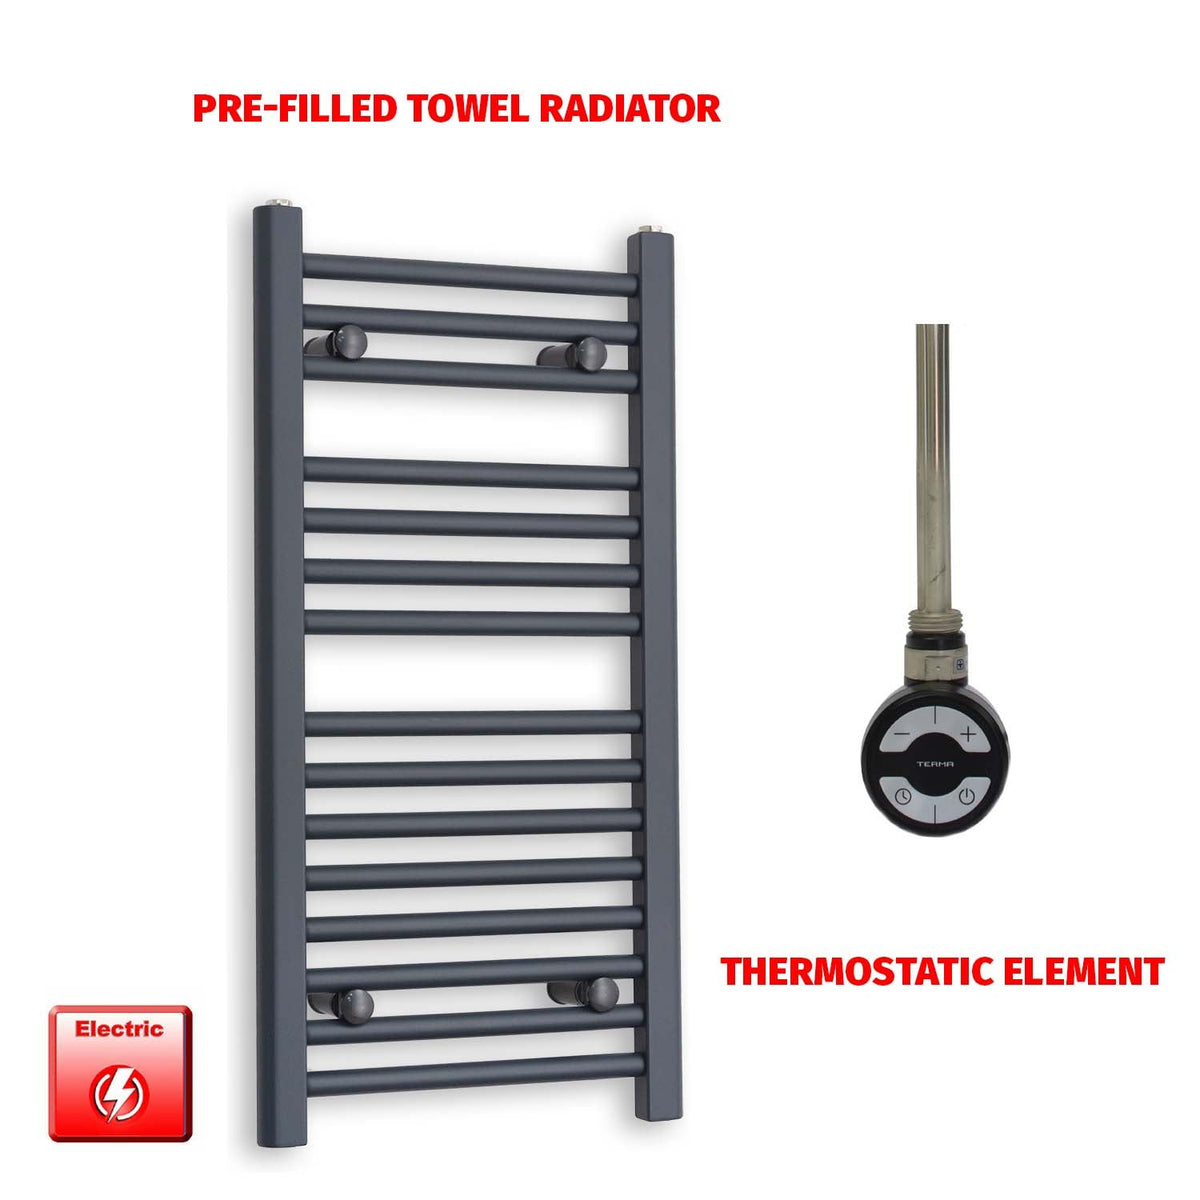 800mm High 400mm Wide Flat Anthracite Pre-Filled Electric Heated Towel Radiator HTR MOA Thermostatic element no timer